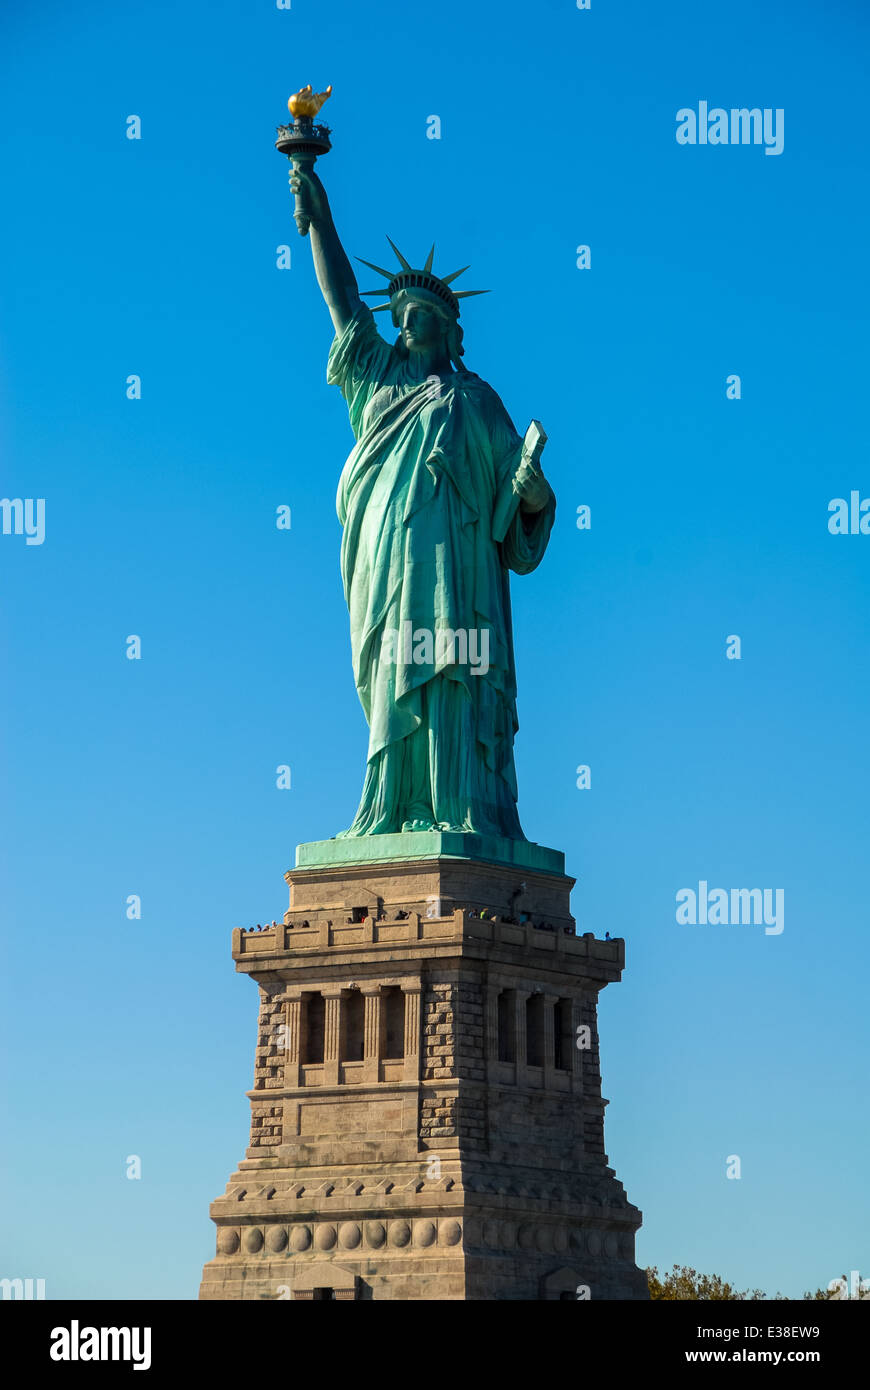 statue of liberty in new york, usa Stock Photo